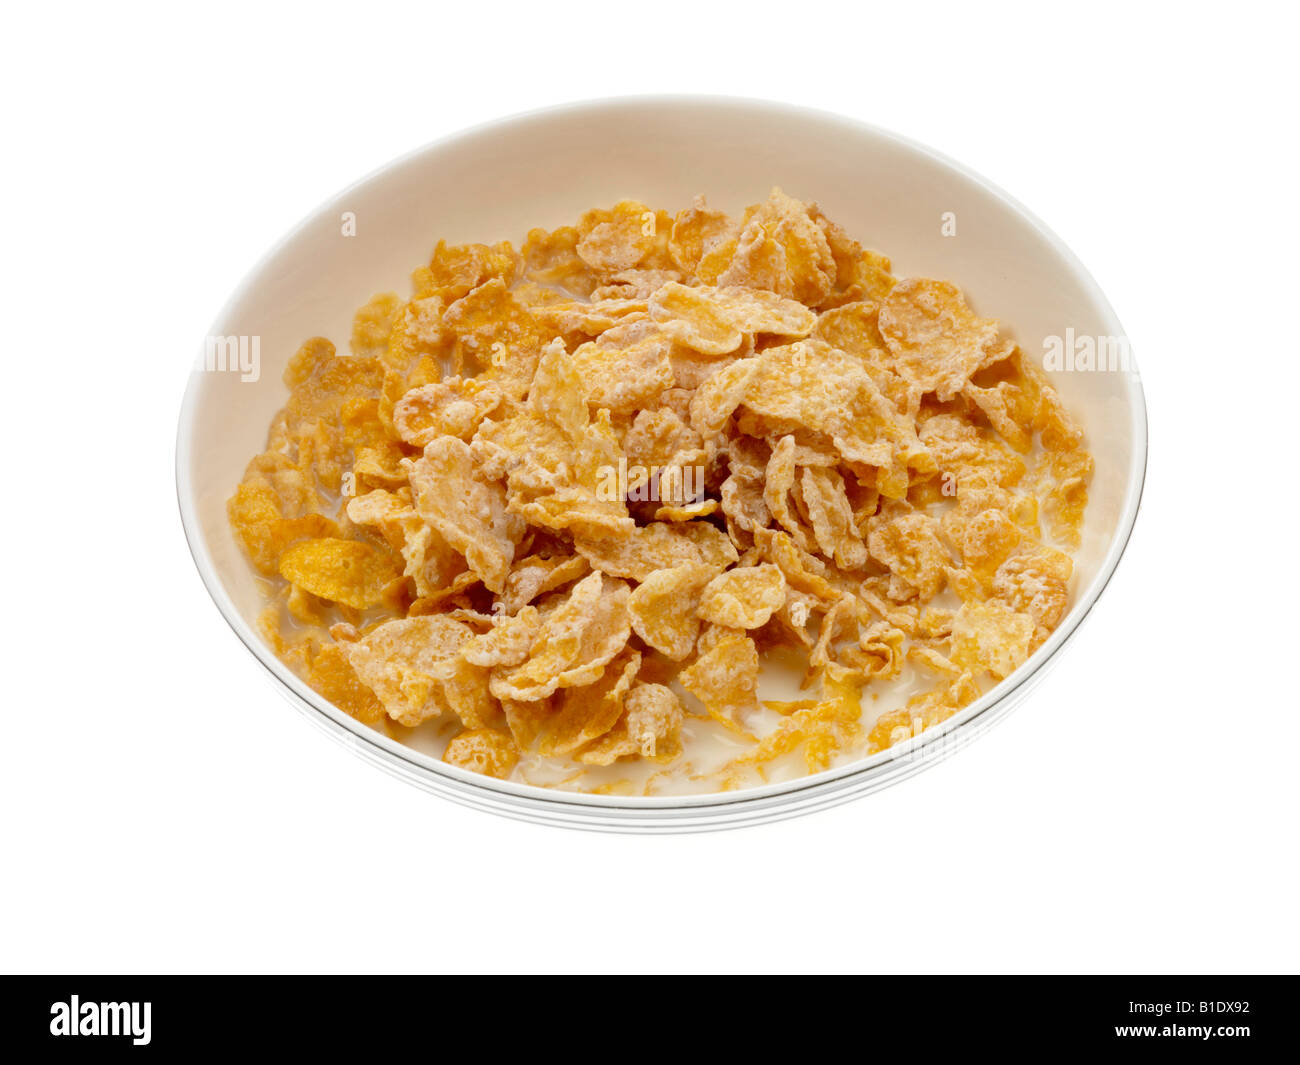 Food Club Frosted Flakes Cereal 15 oz, Cereal